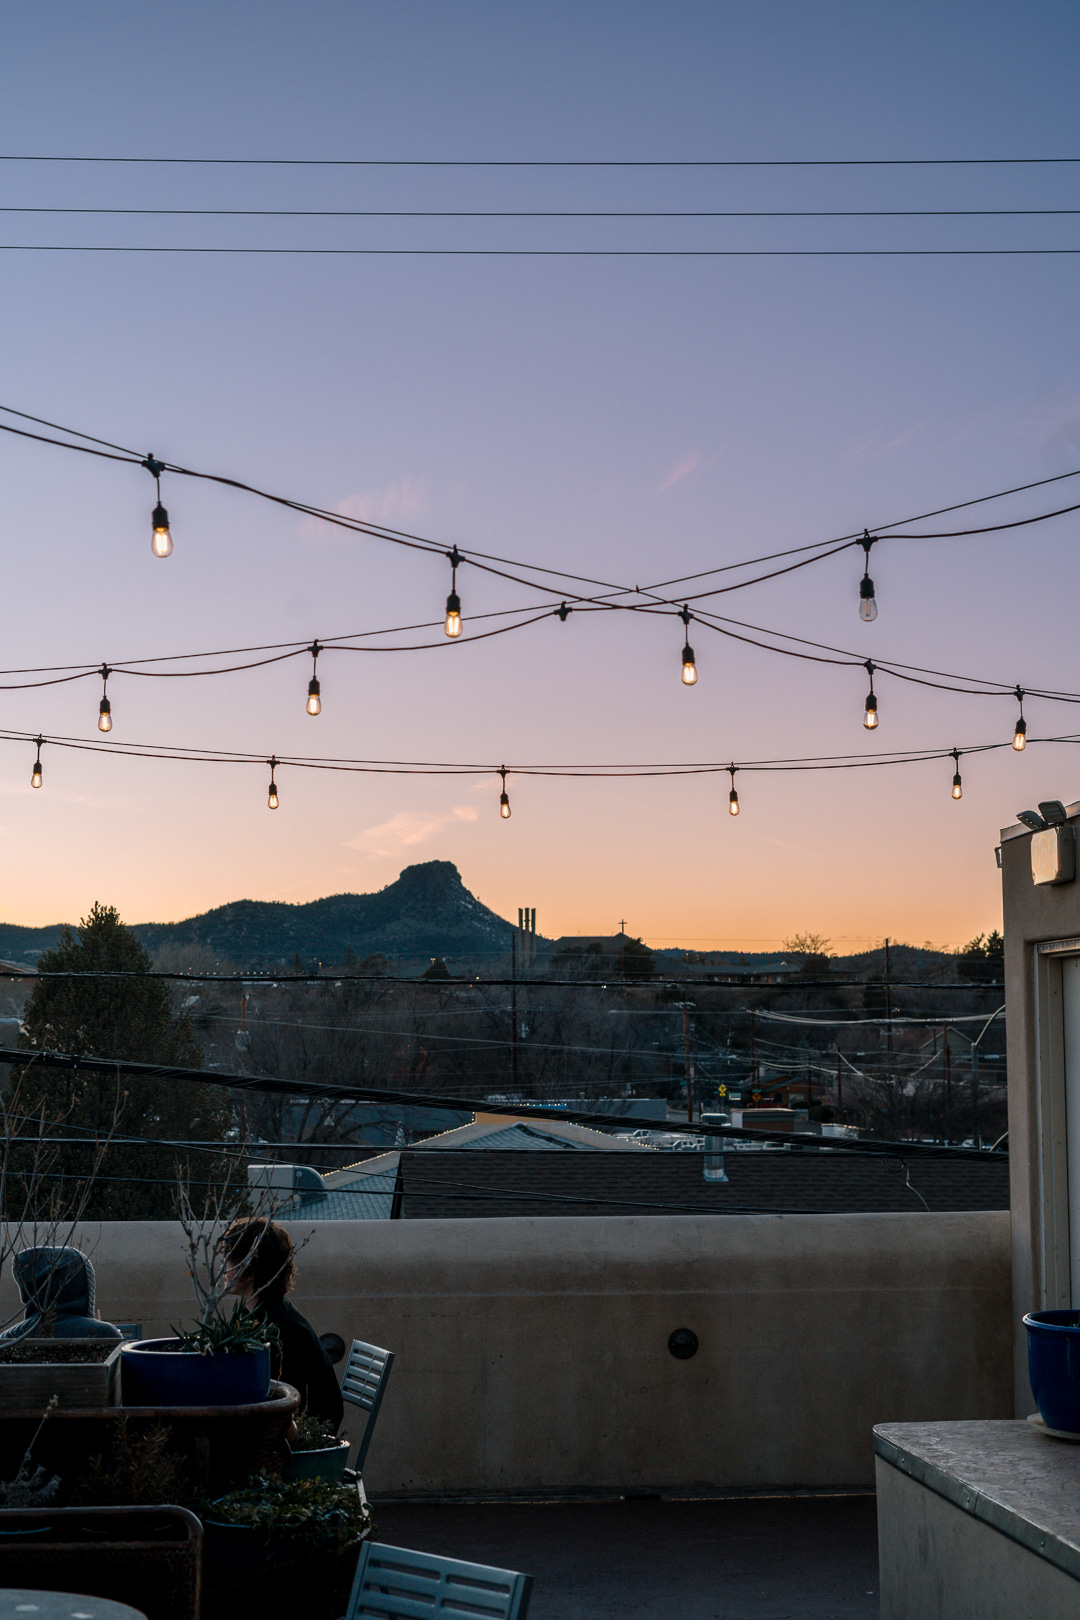 Rooftop Views at The Raven Cafe in Prescott, AZ